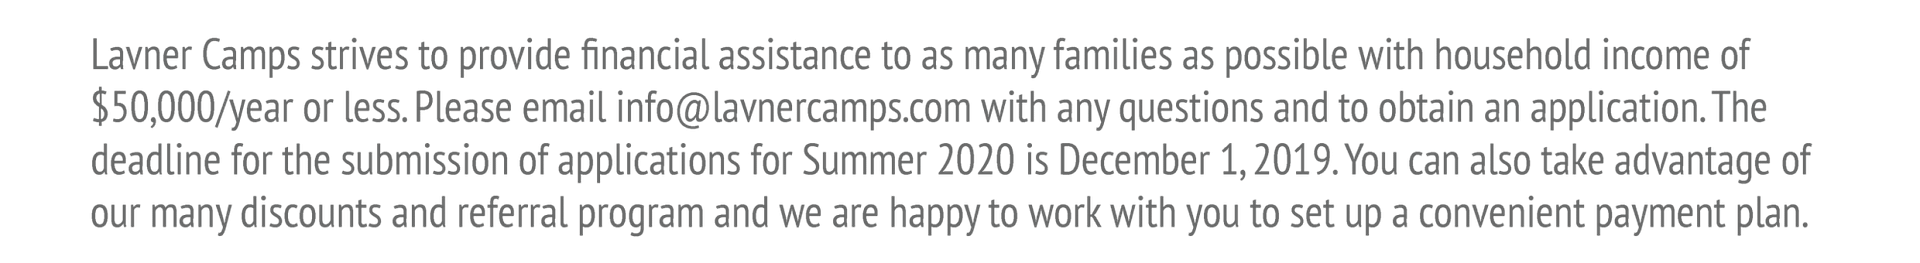 Philadelphia Summer Camps At Penn Lavner Camps 2020 Tech Camps - kids connected learn to create your own roblox game online class grades 4 9 starts oct 14